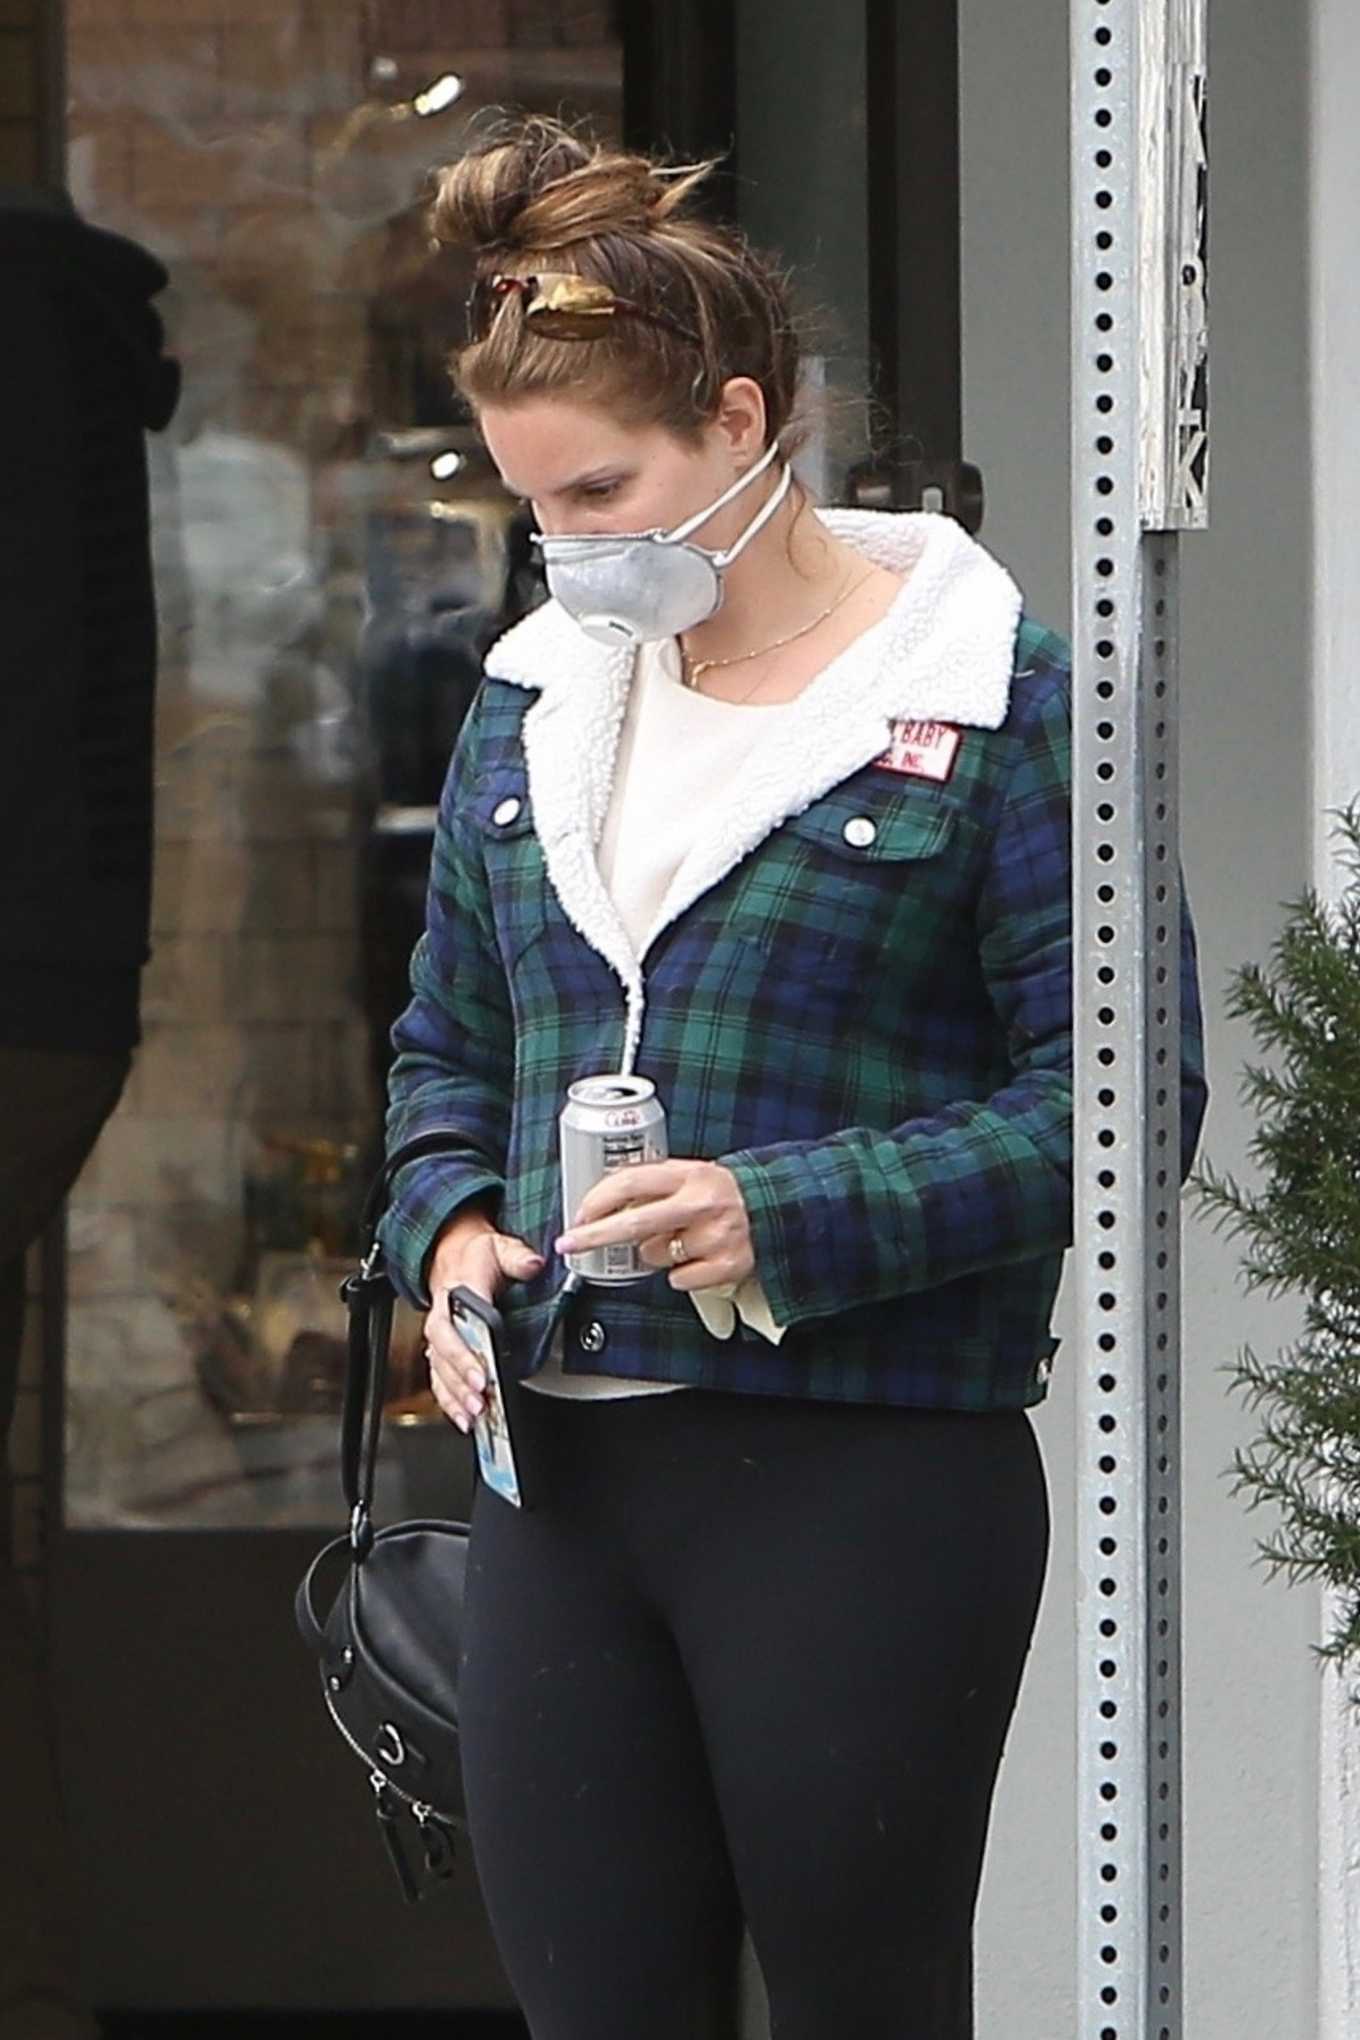 Lana Del Rey â€“ Wear mask while out in Los Angeles